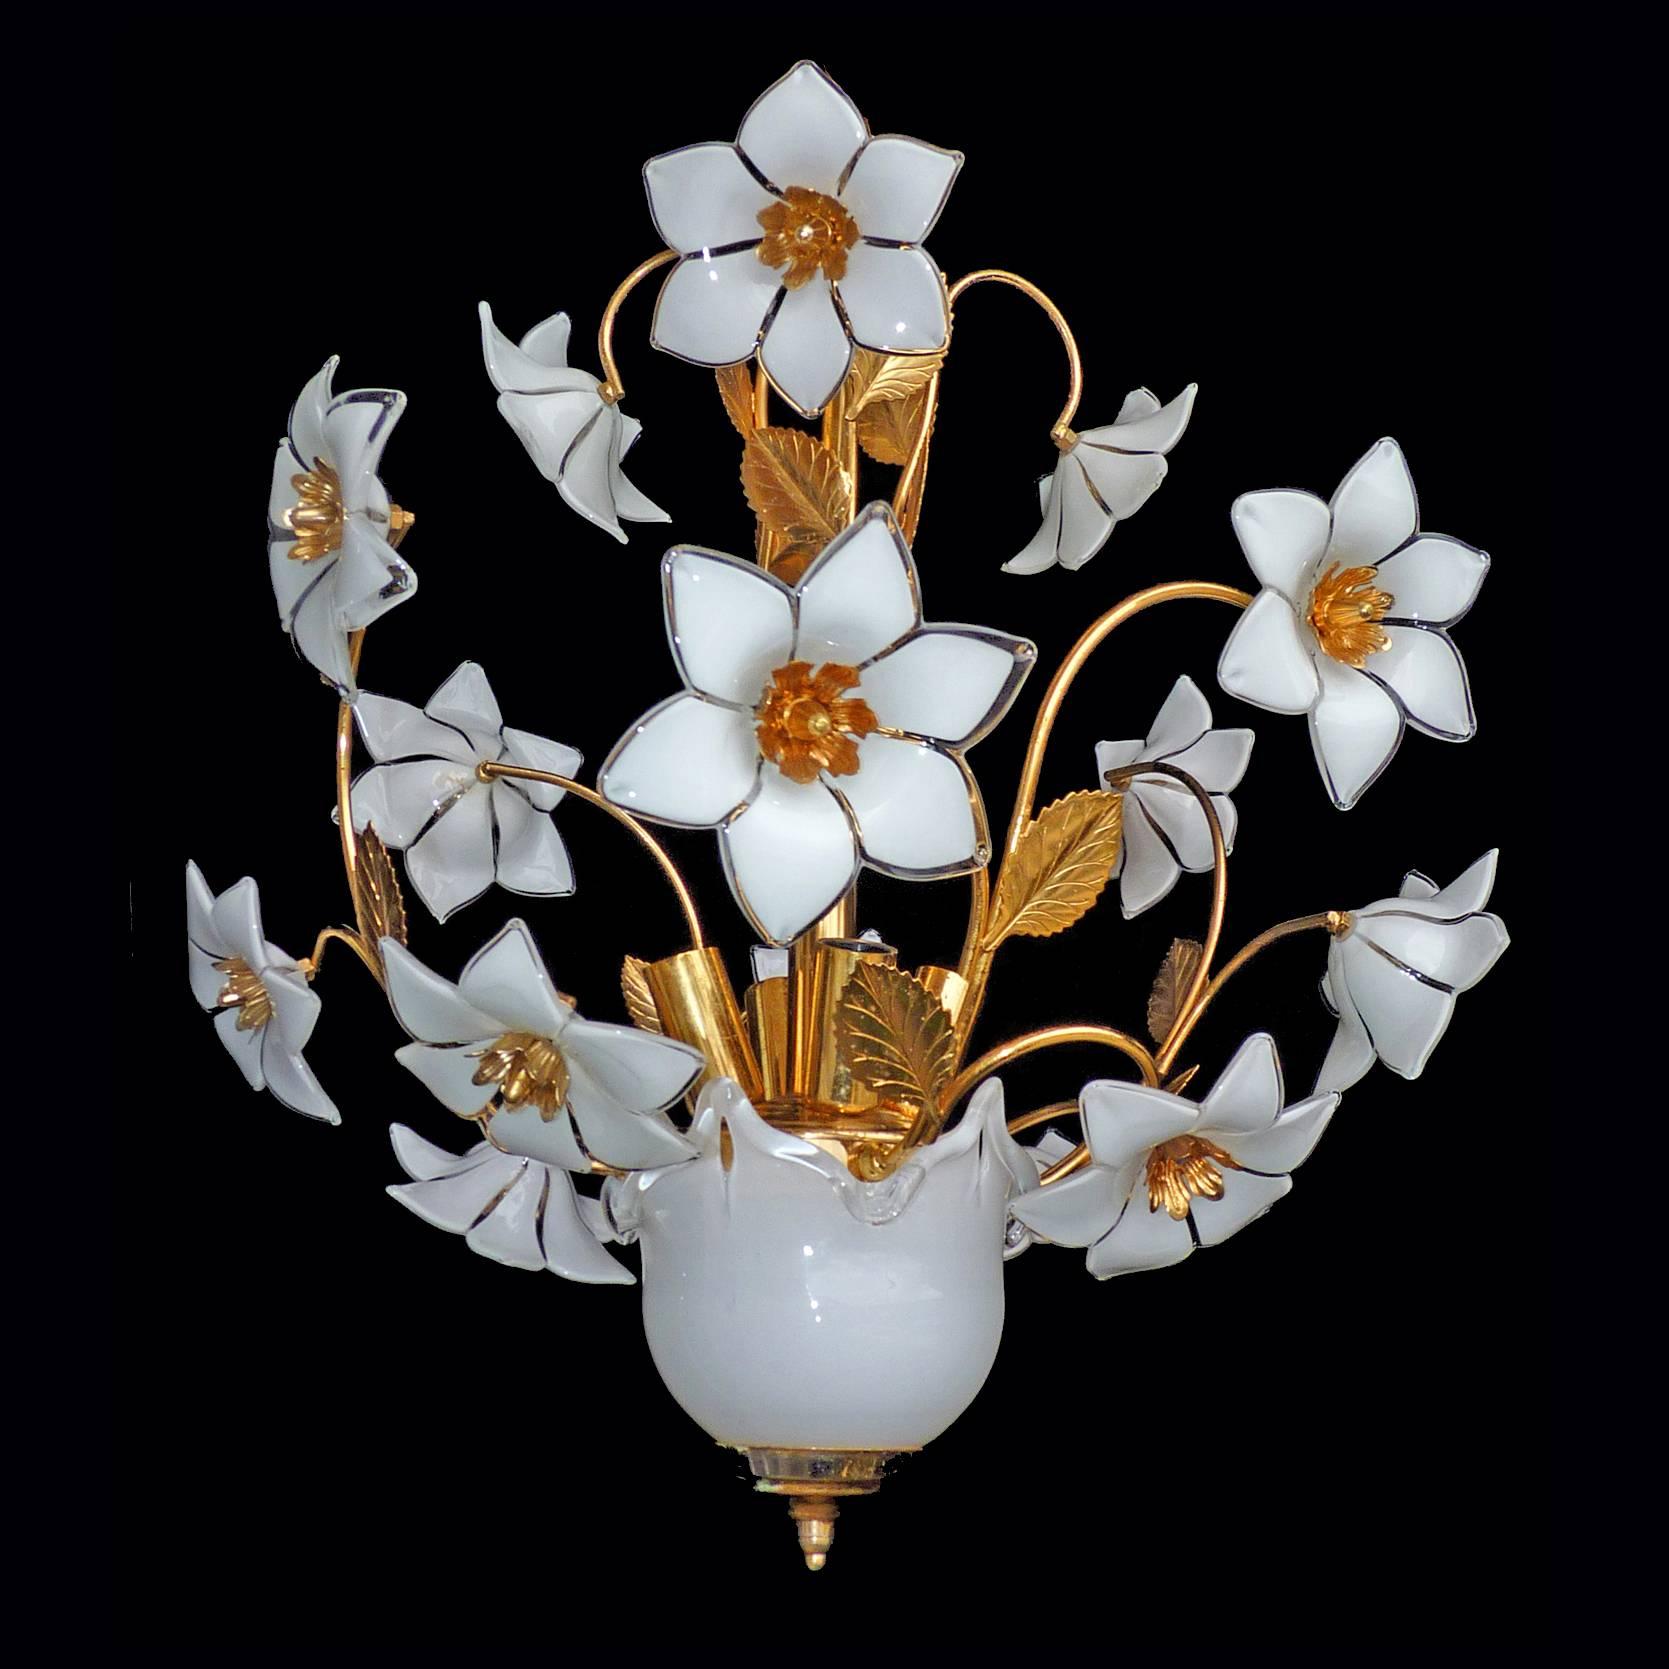 1970s vintage Italian Murano flower bouquet after Venini art-glass/ hand-blow white and clear glass flowers and gold-plated brass.
Measures:
Diameter 18 in/ 45 cm
Height 34 in (24 in + 10 in/ chain) ; 85 cm (60 cm + 25 cm/chain)
Weight: 7 lb/3